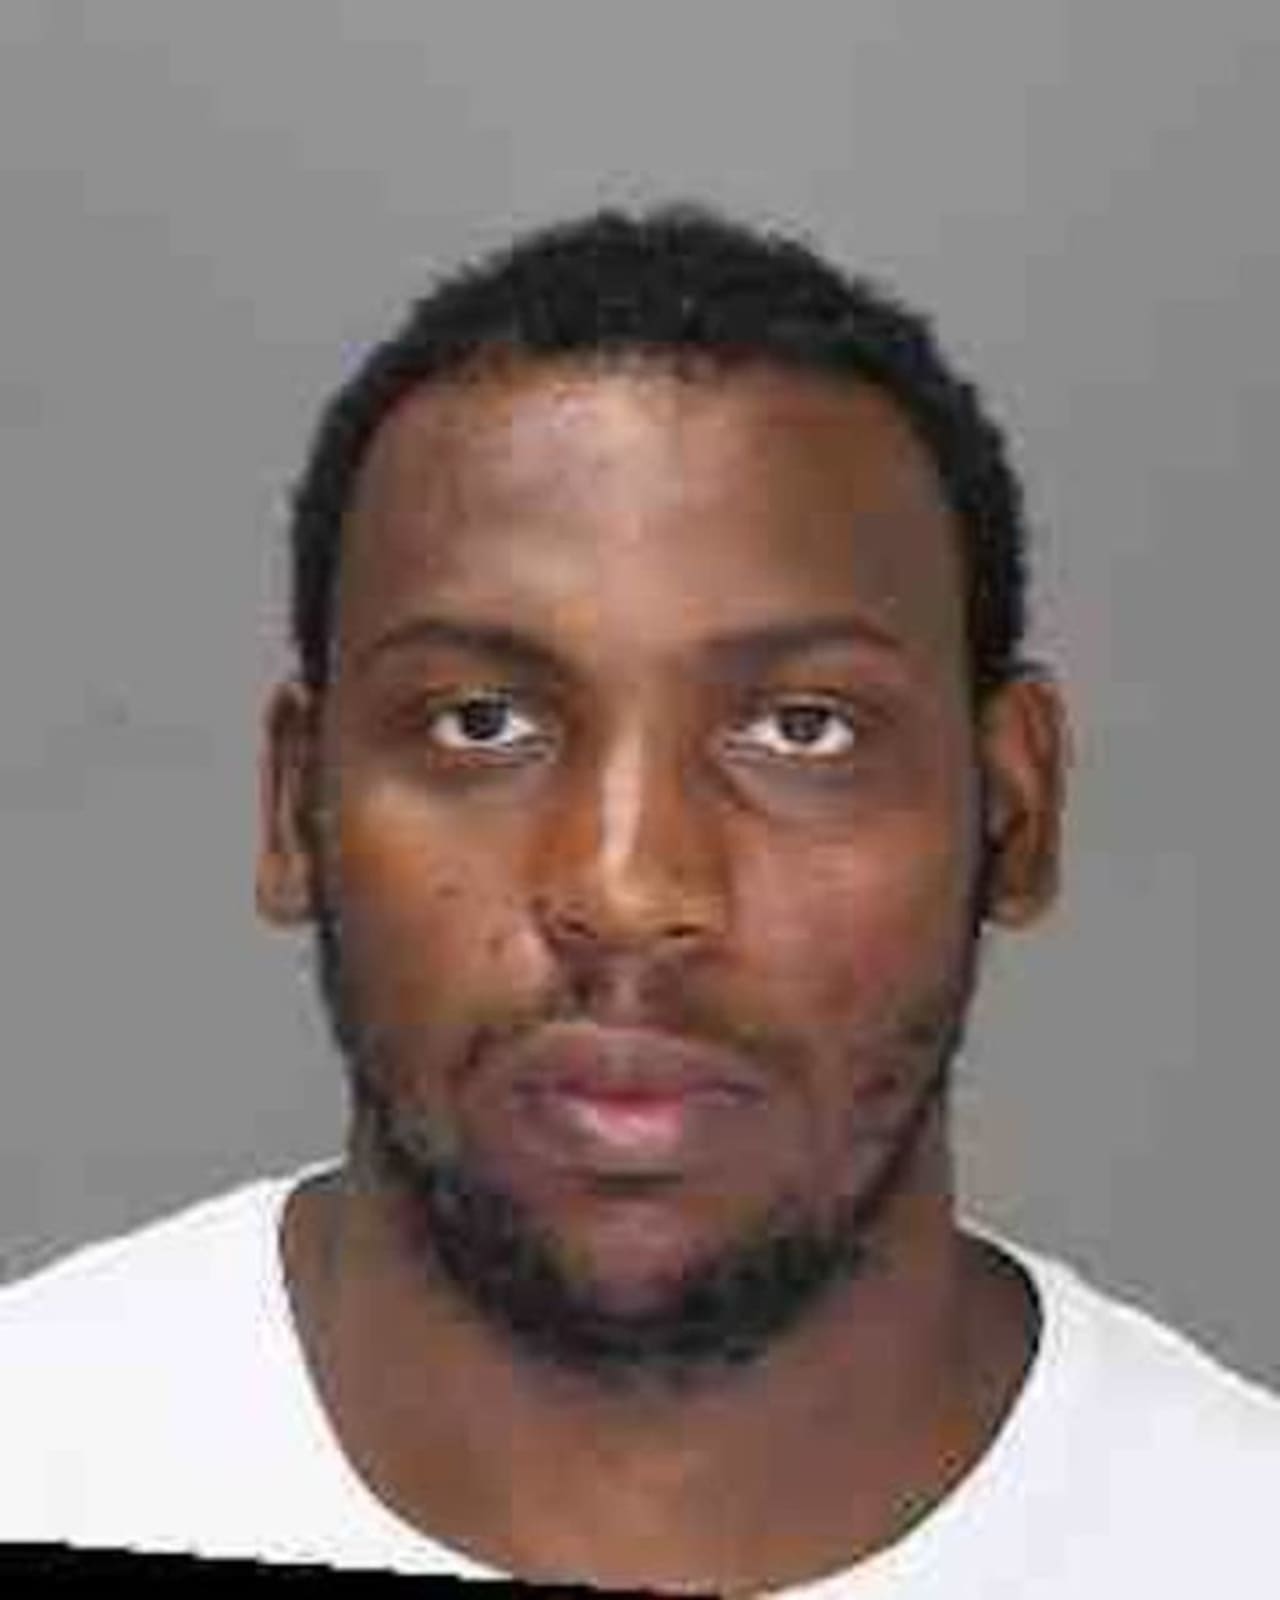 Pelege Brevil is wanted by the Ramapo Police for assault.